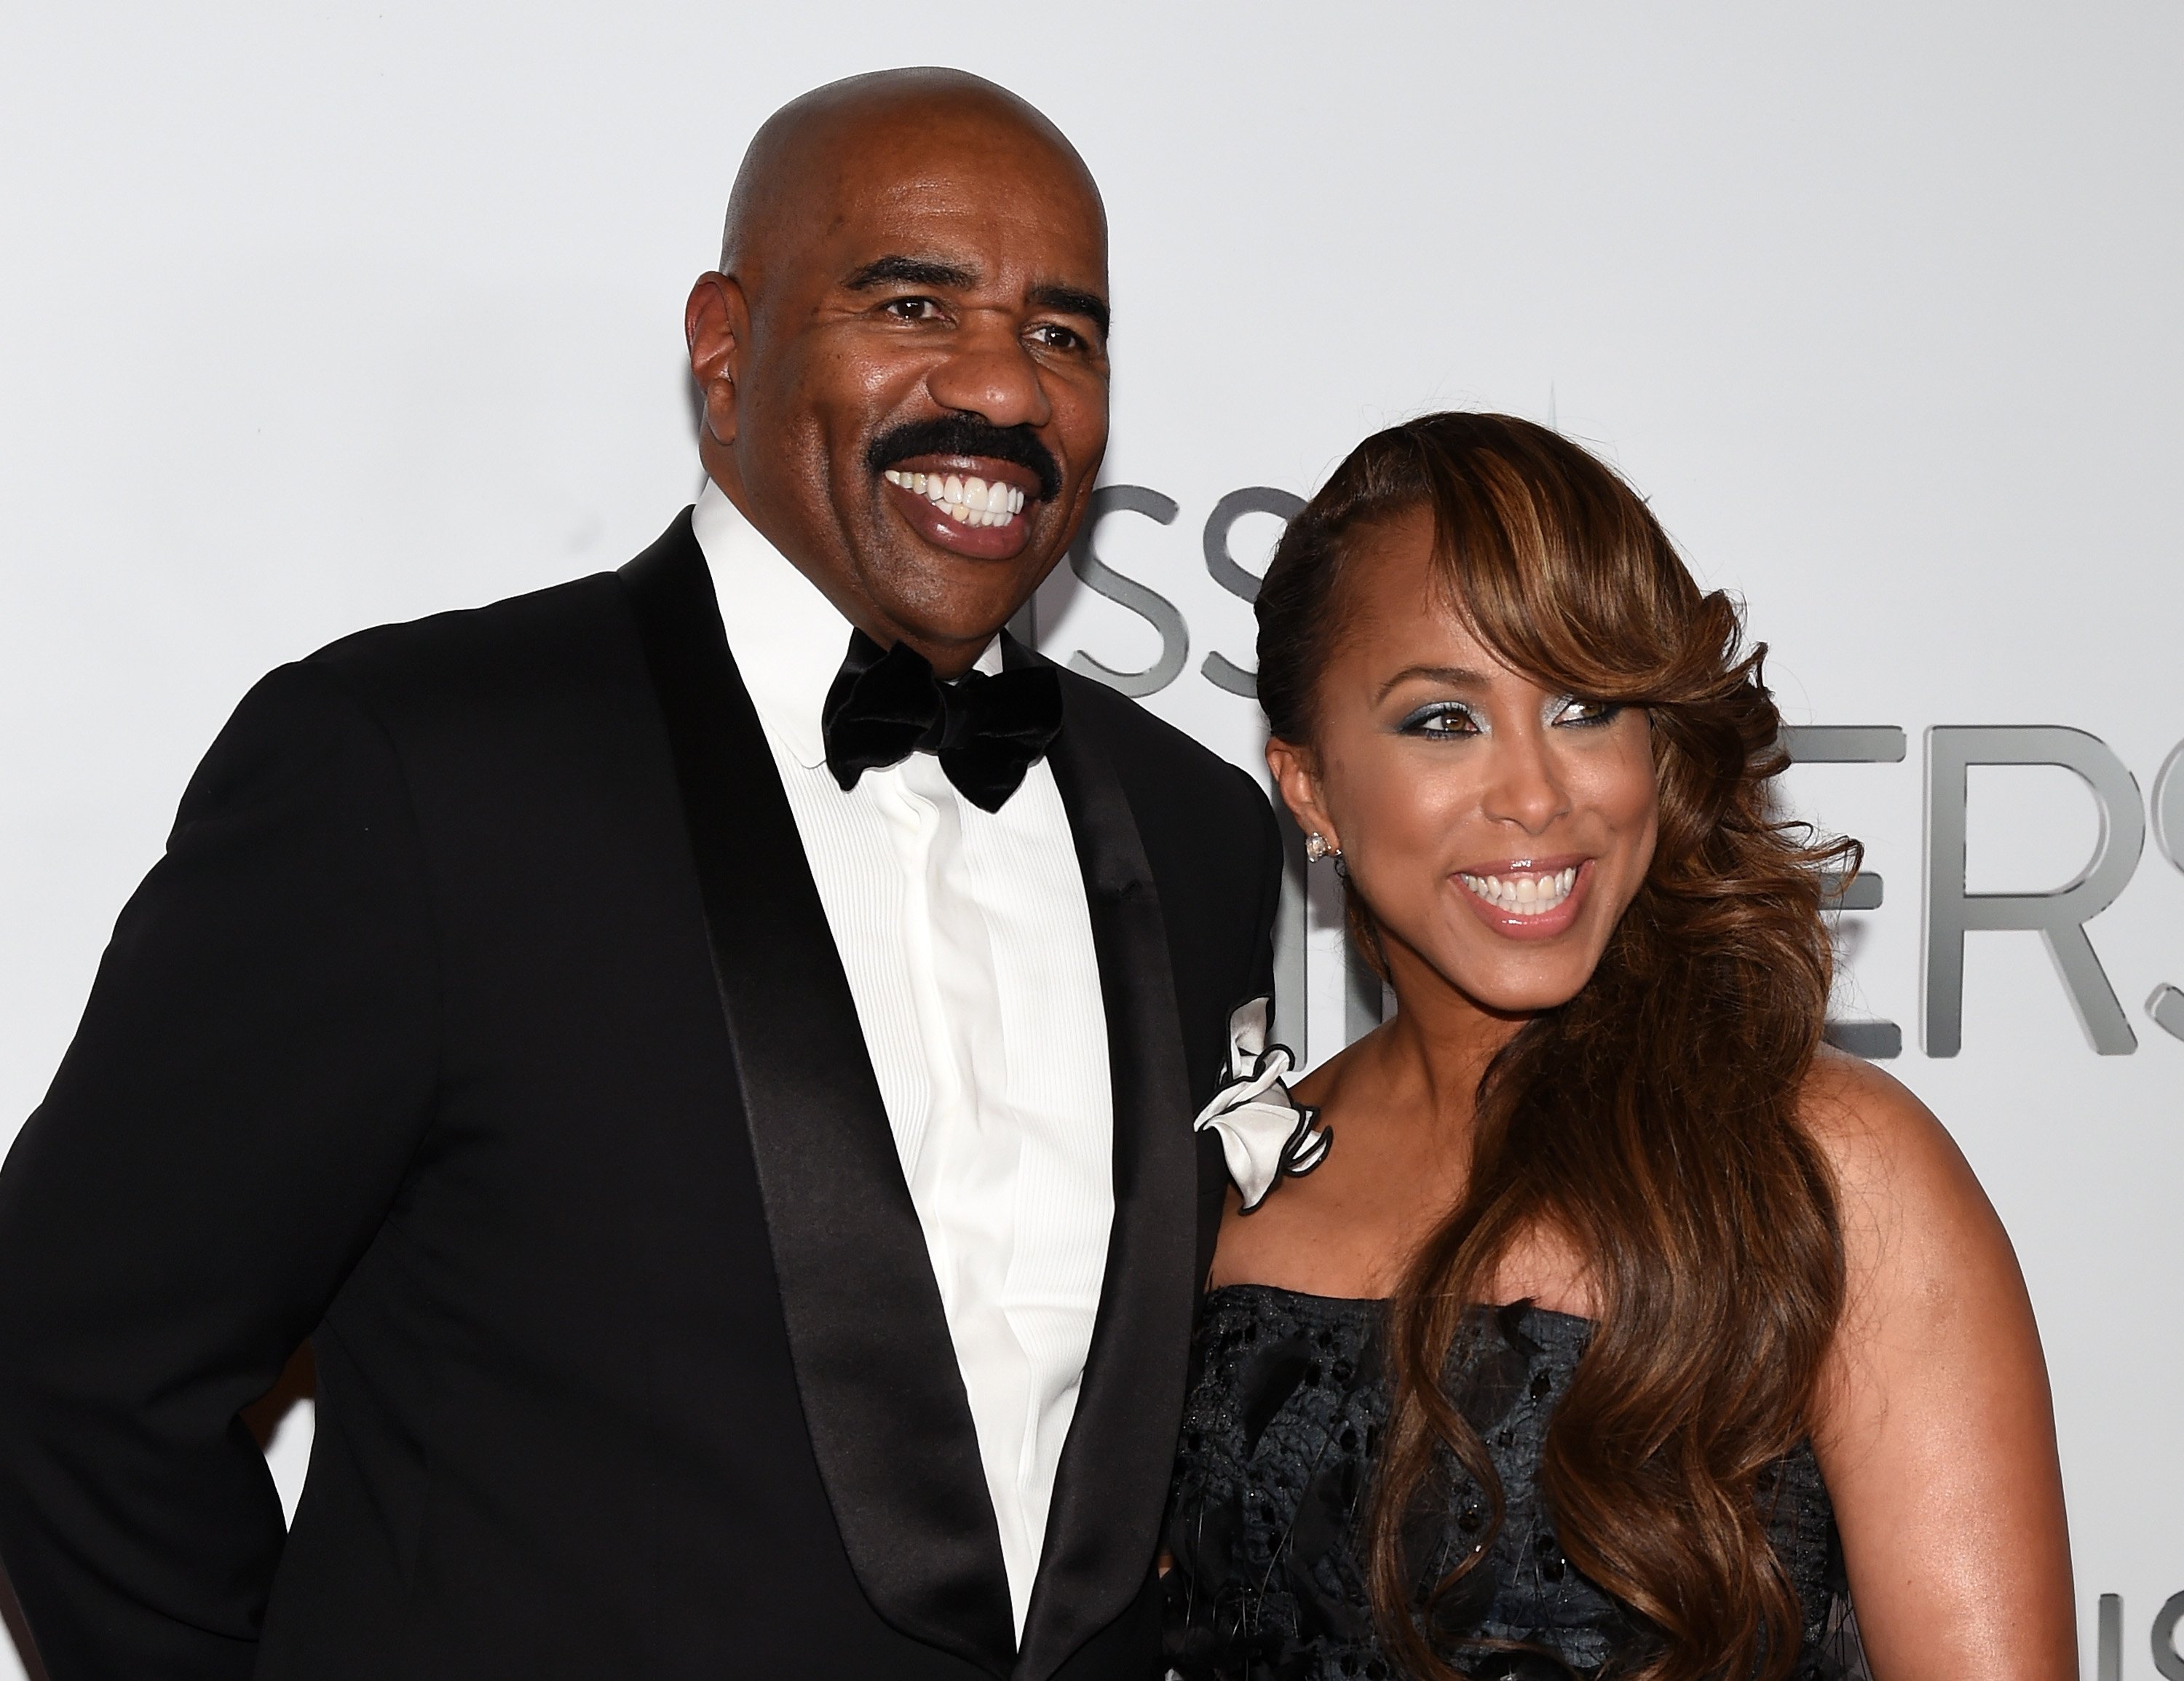 Steve and Marjorie Harvey at the 2015 Miss Universe Pageant on December 20, 2015 in Las Vegas, Nevada l Source: Getty Images 